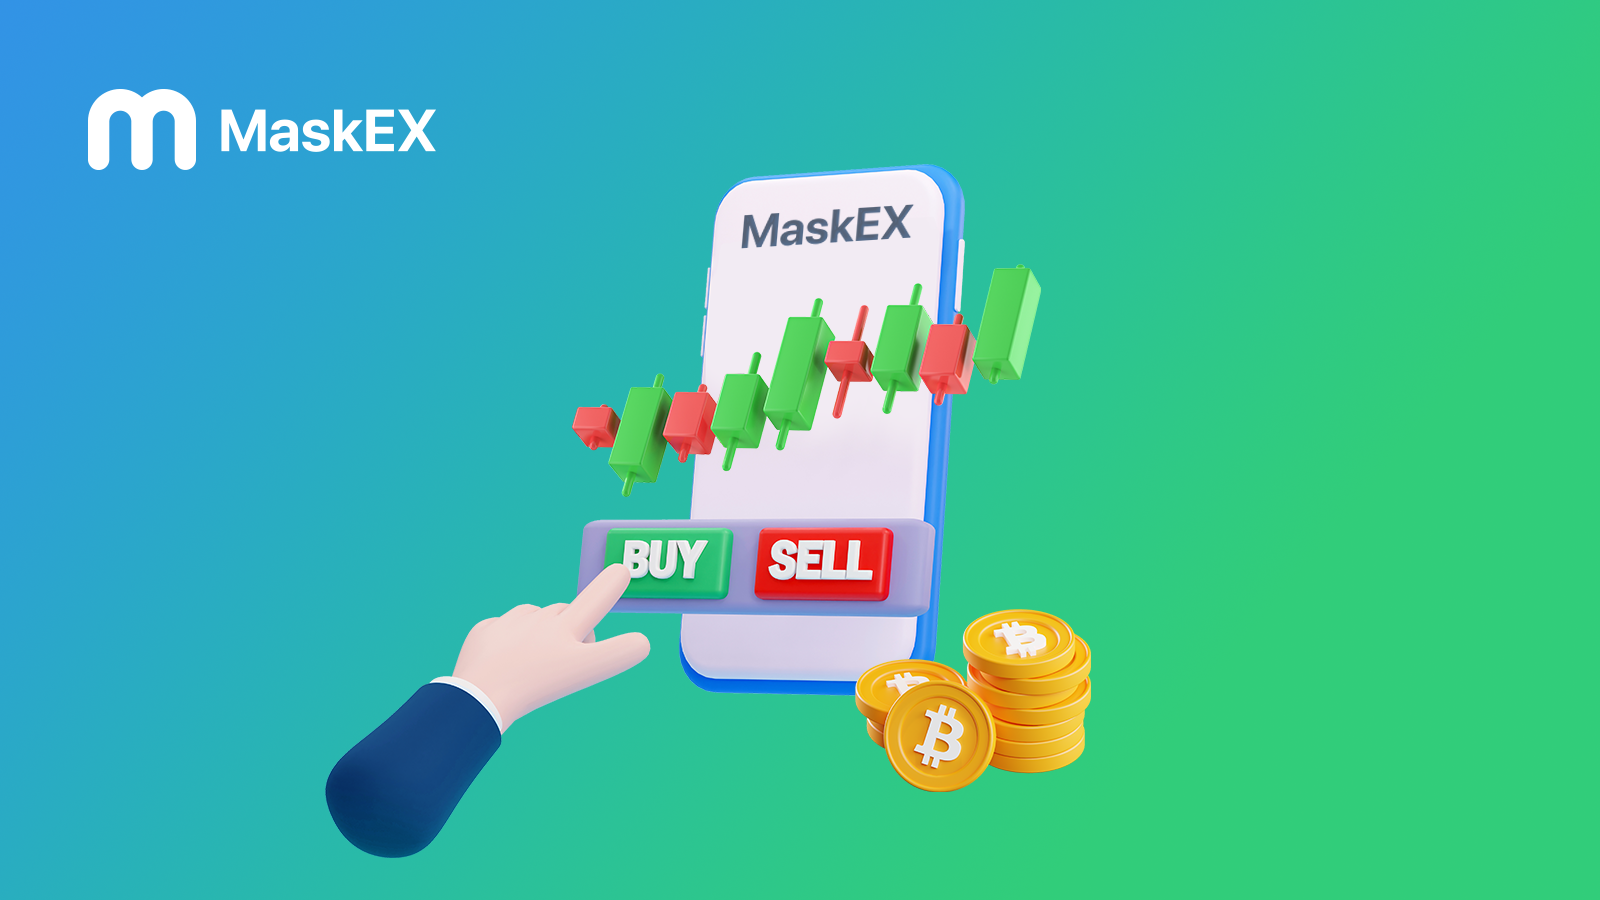 A Comprehensive Guide to Buying and Receiving Cryptocurrencies on MaskEX